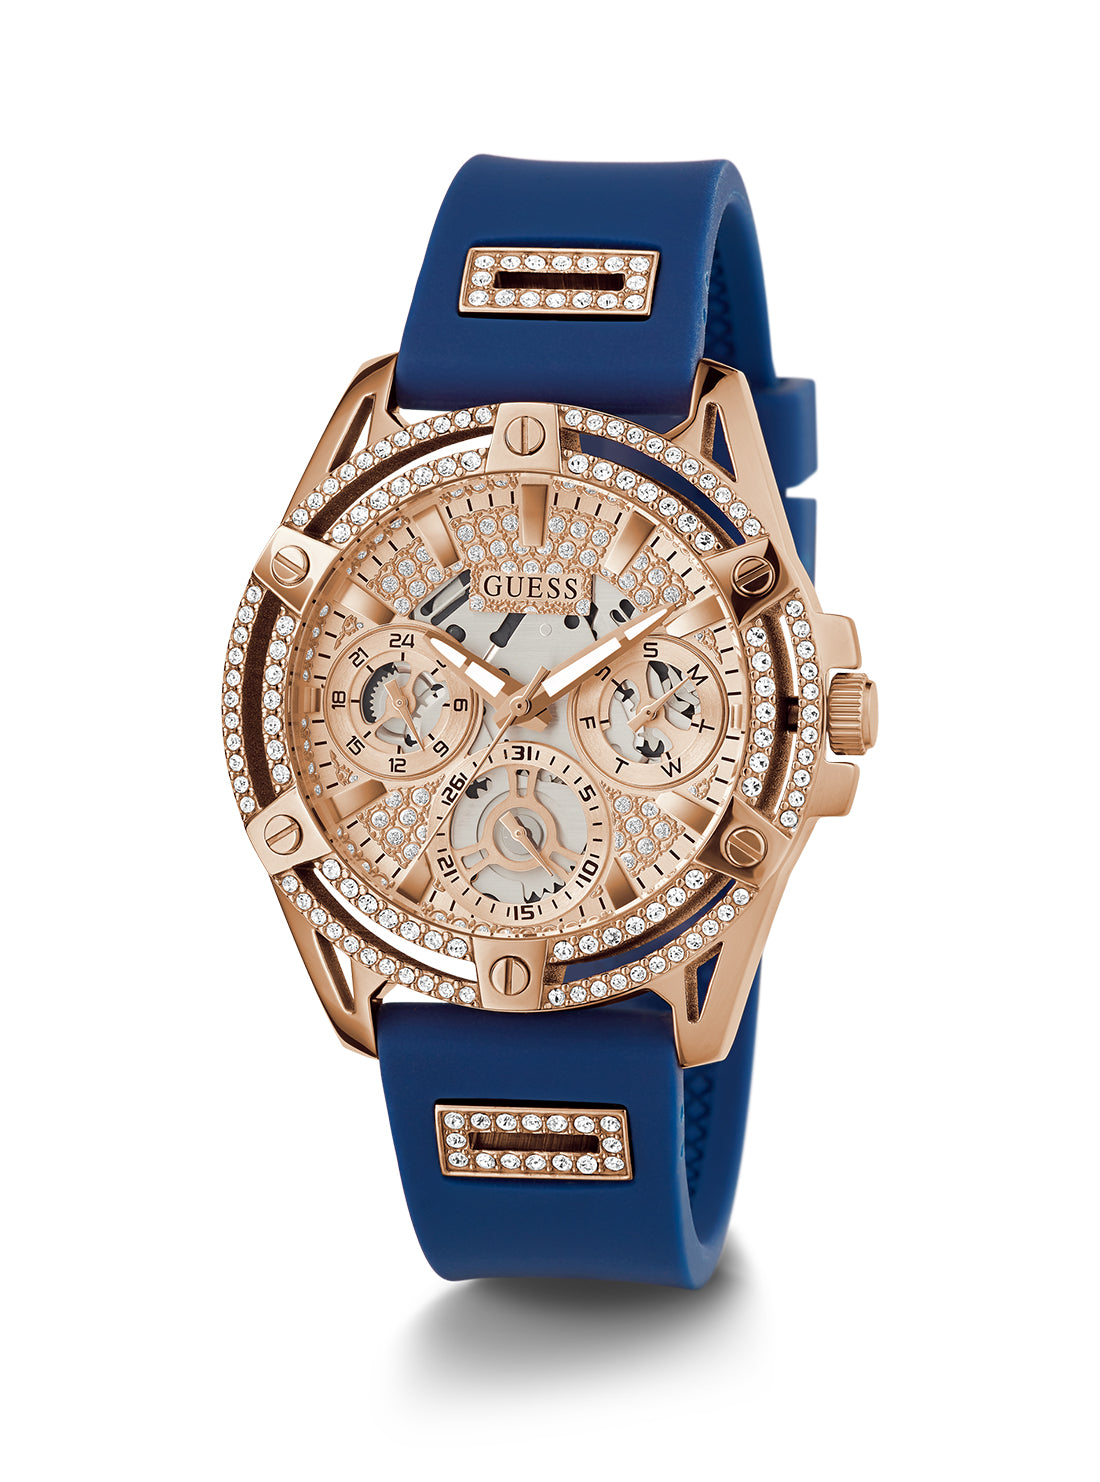 GUESS Women's Rose Gold Blue Queen Silicone Watch GW0536L5 Full View